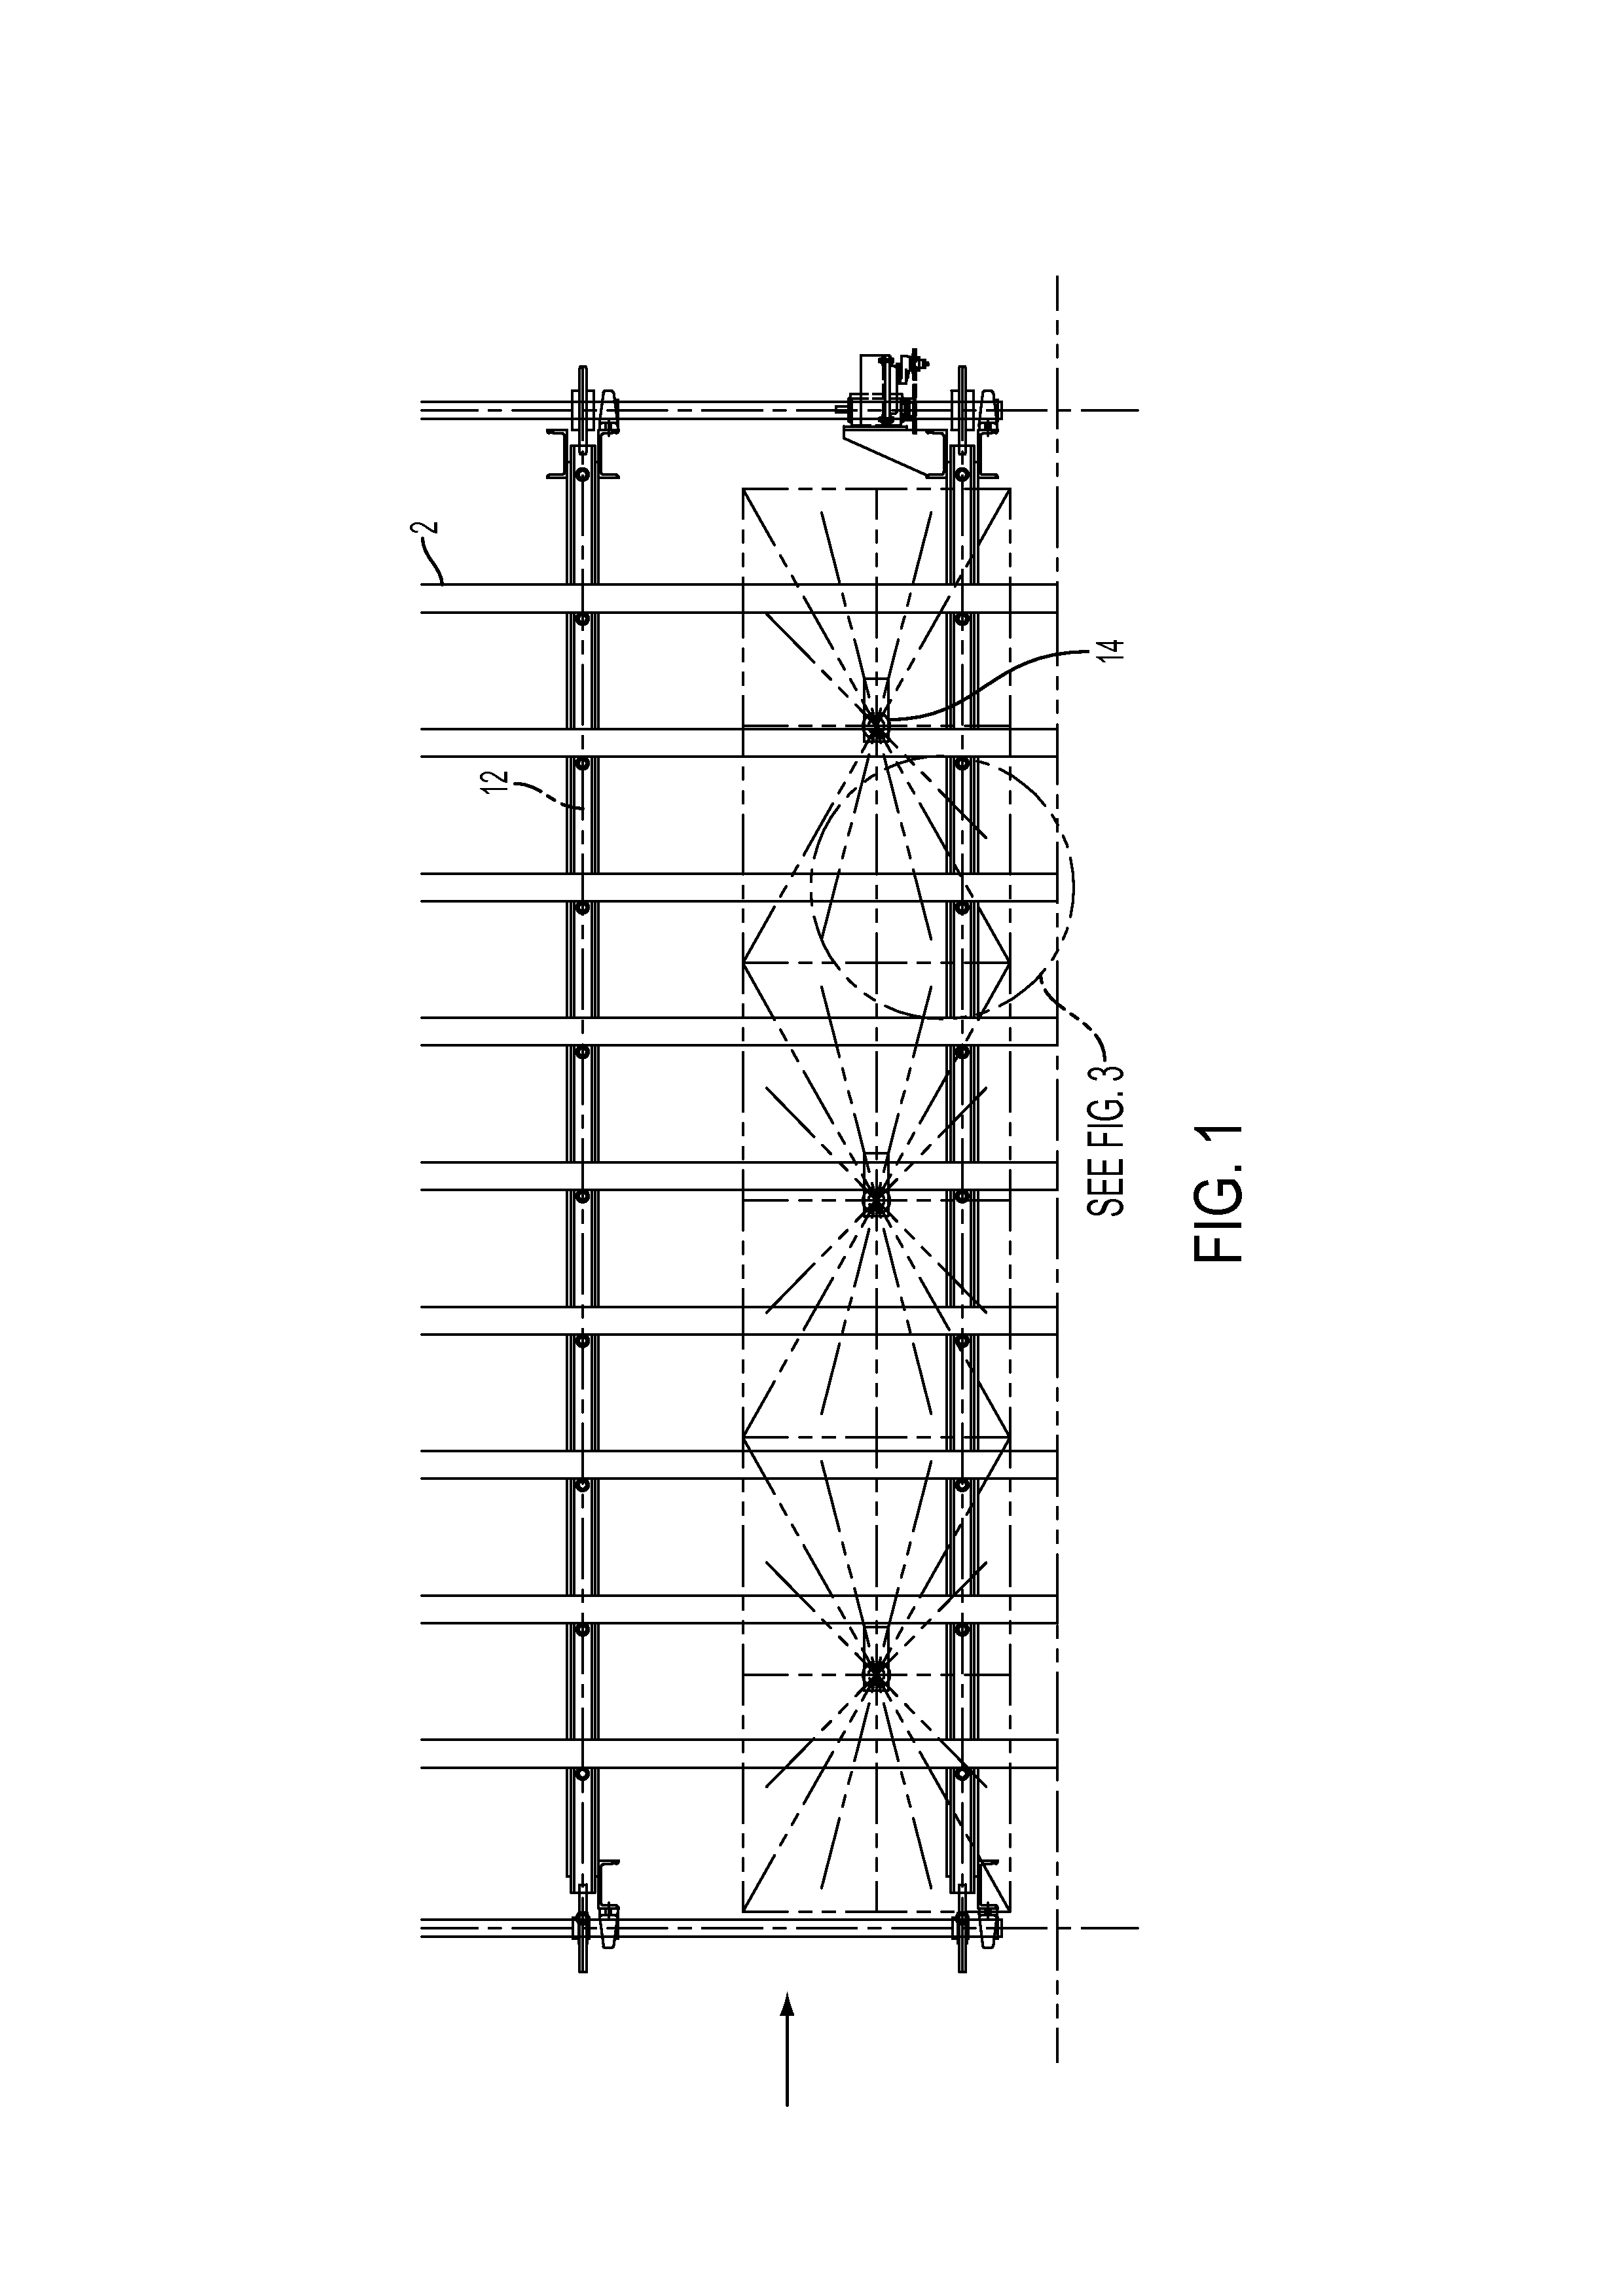 Apparatus and method for manually confirming electronically stored information regarding a piece of lumber